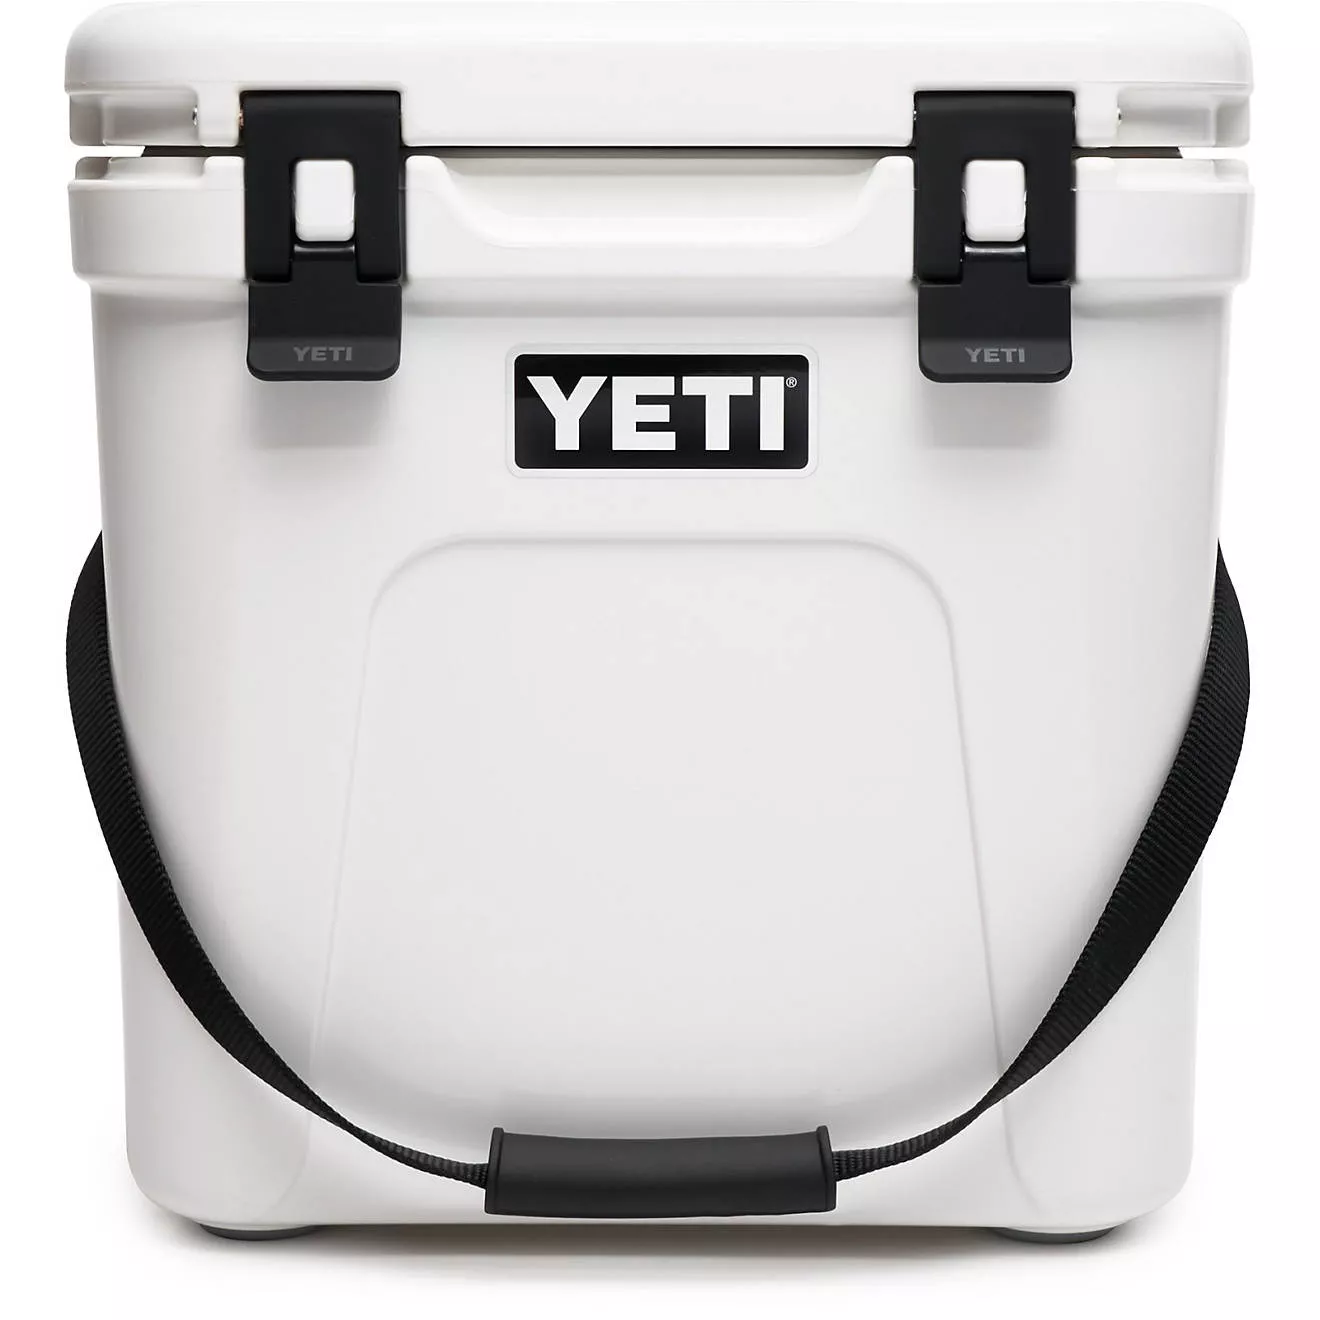 YETI Tundra 45 Cooler curated on LTK